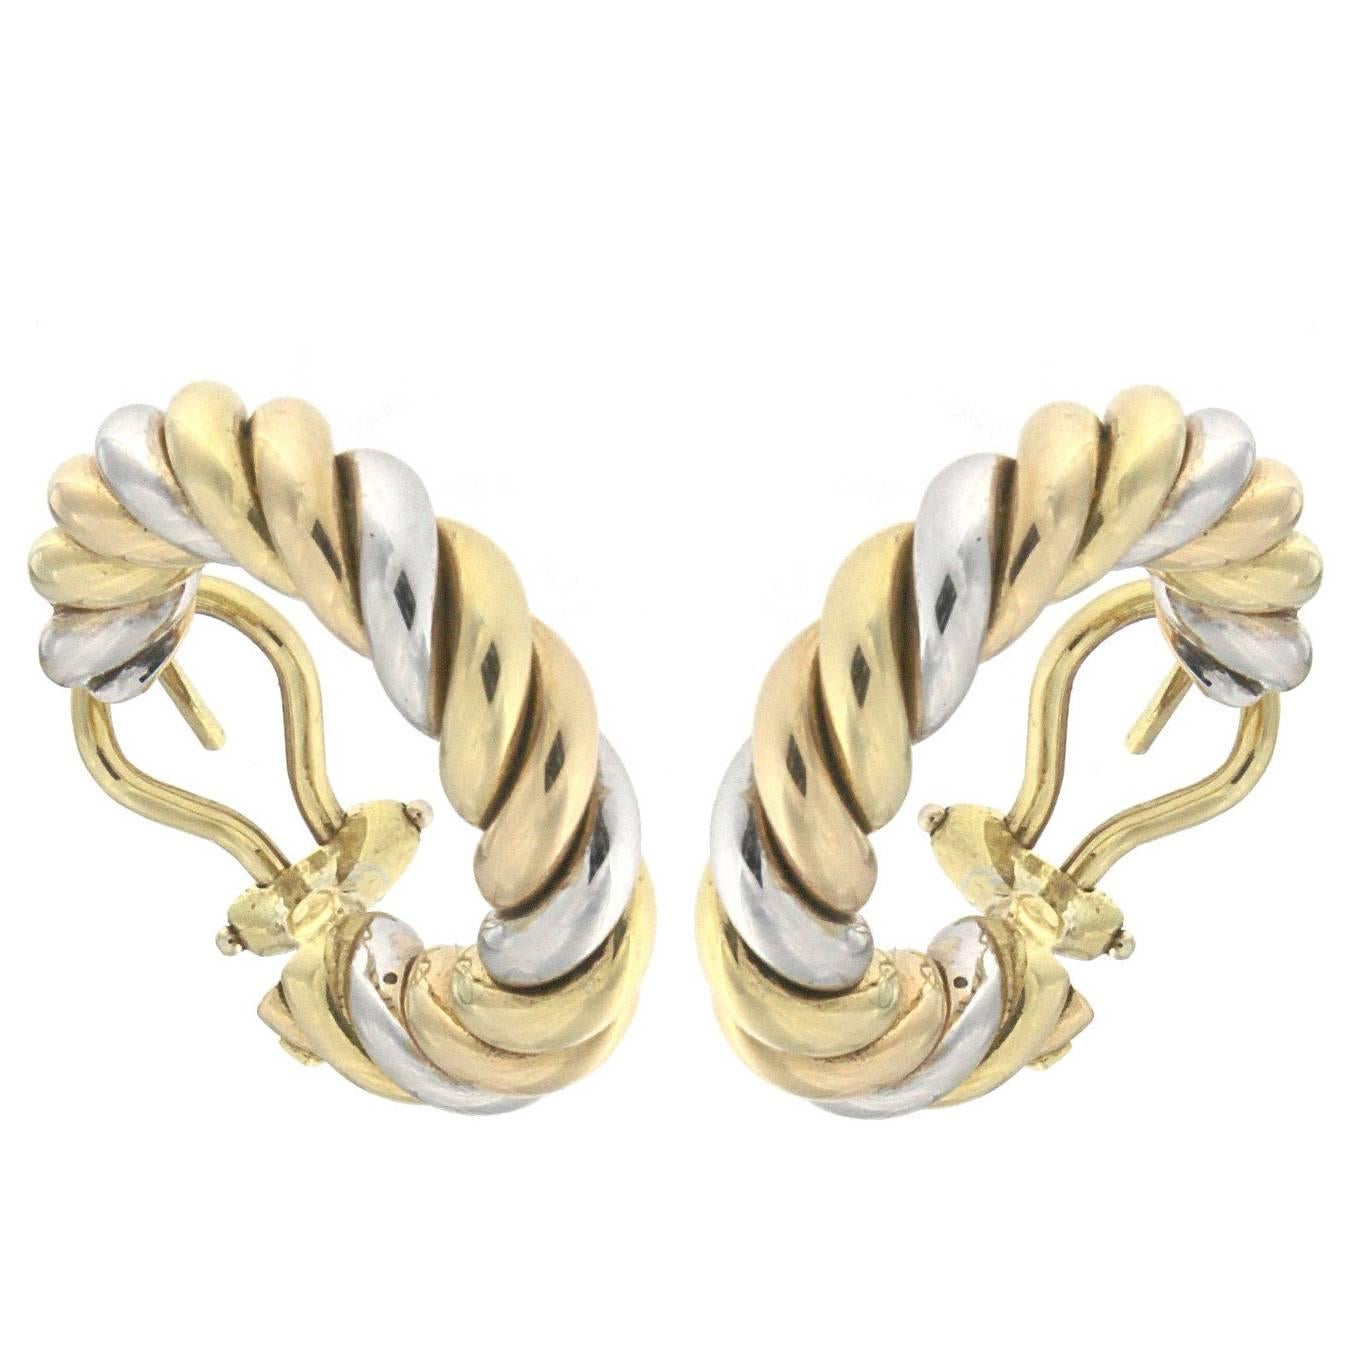 Pair of Earrings from the Collection "Rope" 18 Karat Yellow White and Rose Gold